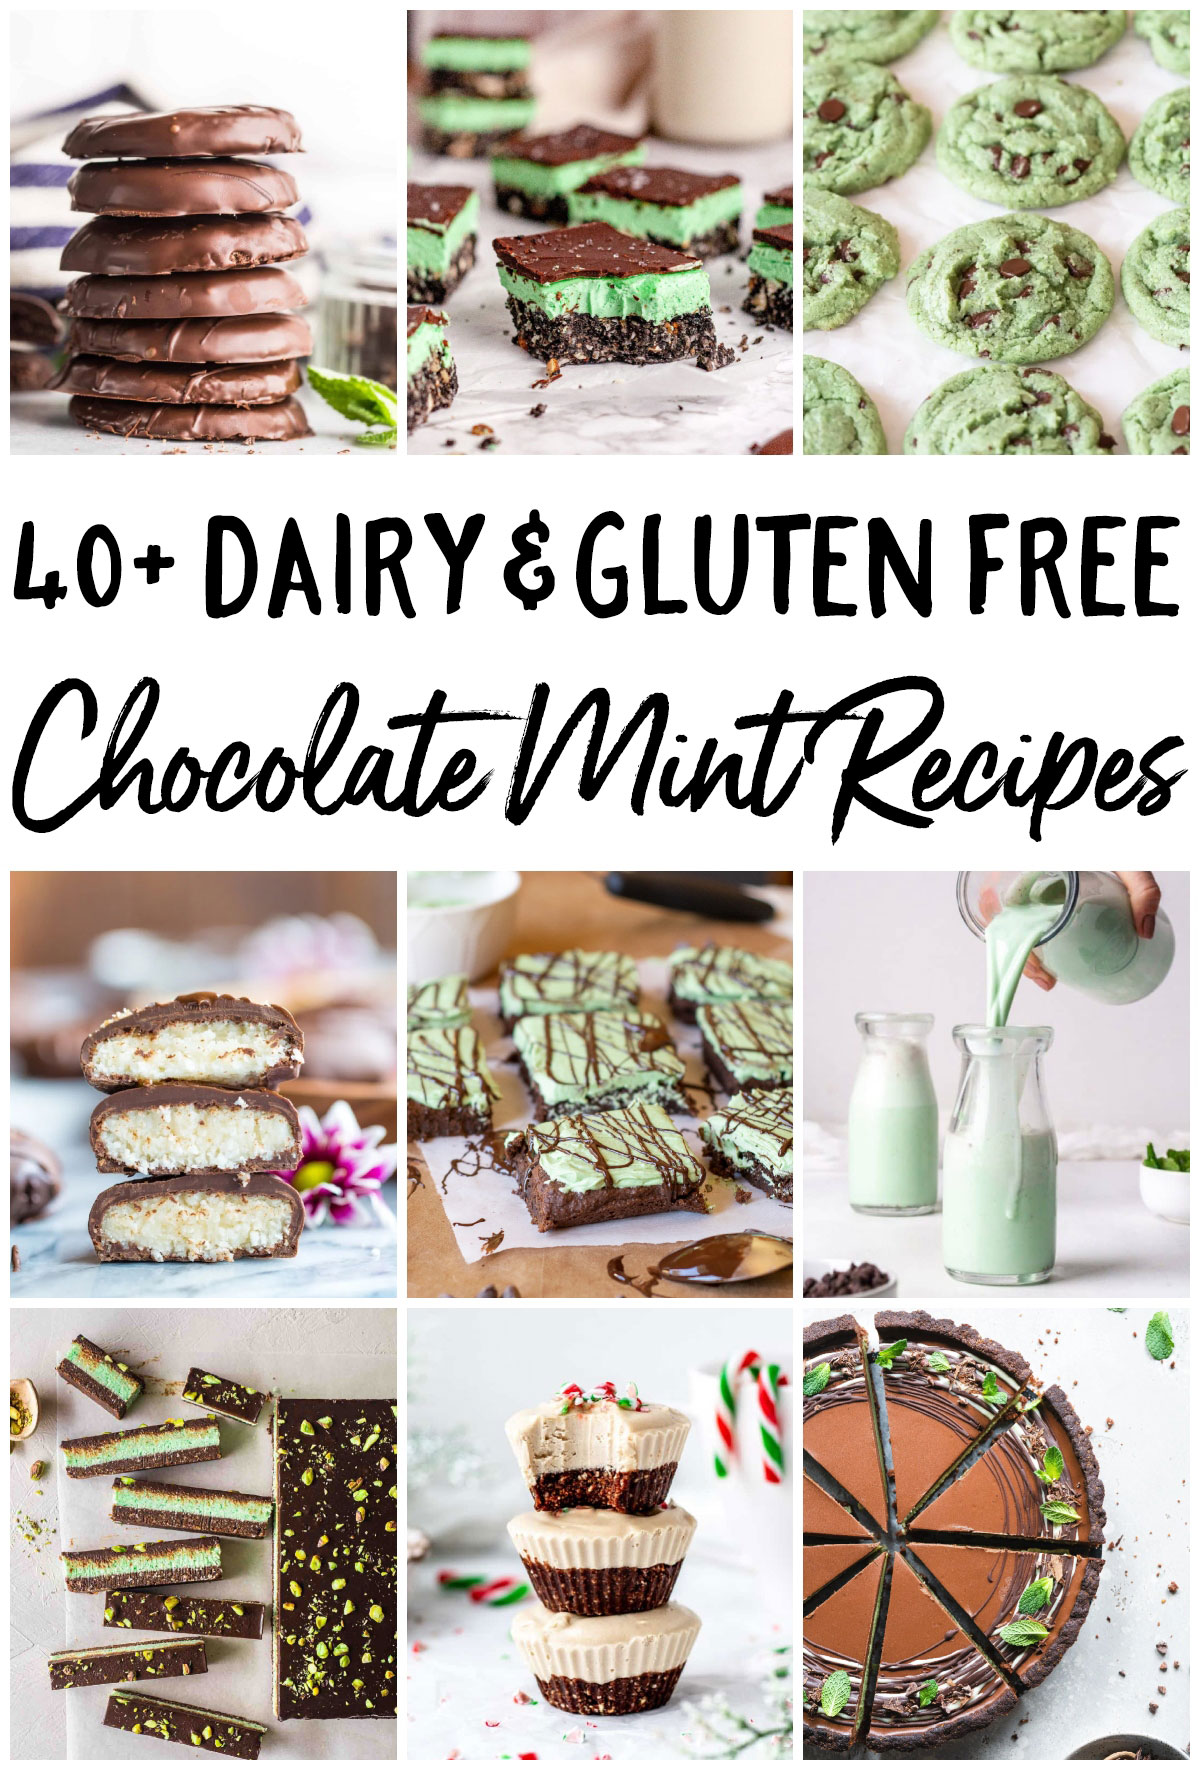 Dairy and gluten free chocolate mint recipes offer delicious treats for those with dietary restrictions. These recipes ensure that everyone can enjoy the decadent combination of rich chocolate and refreshing mint flavors. Whether you are allergic